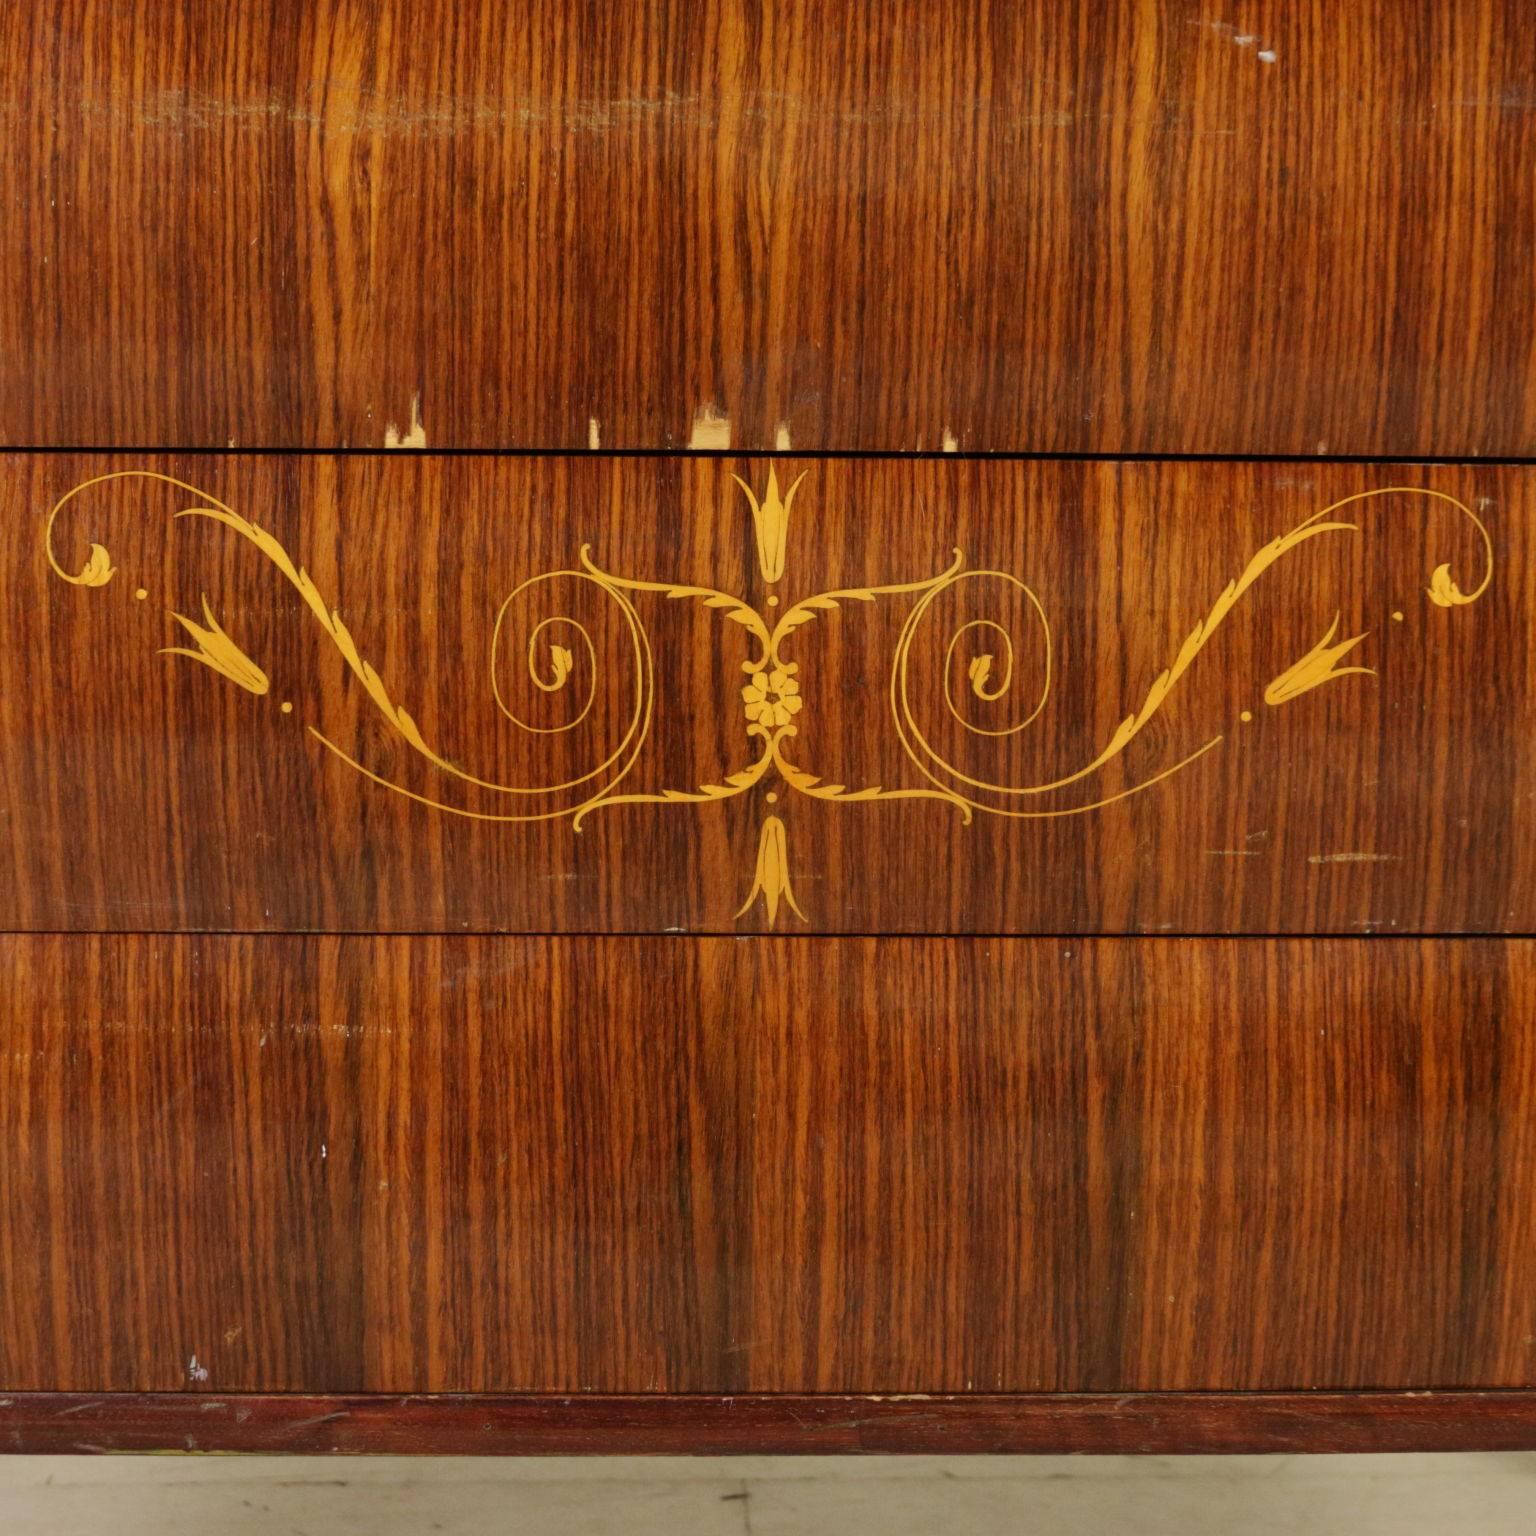 Mid-20th Century Chest of Drawers with Mirror, Rosewood Veneer, Inlaid Floral Decorations